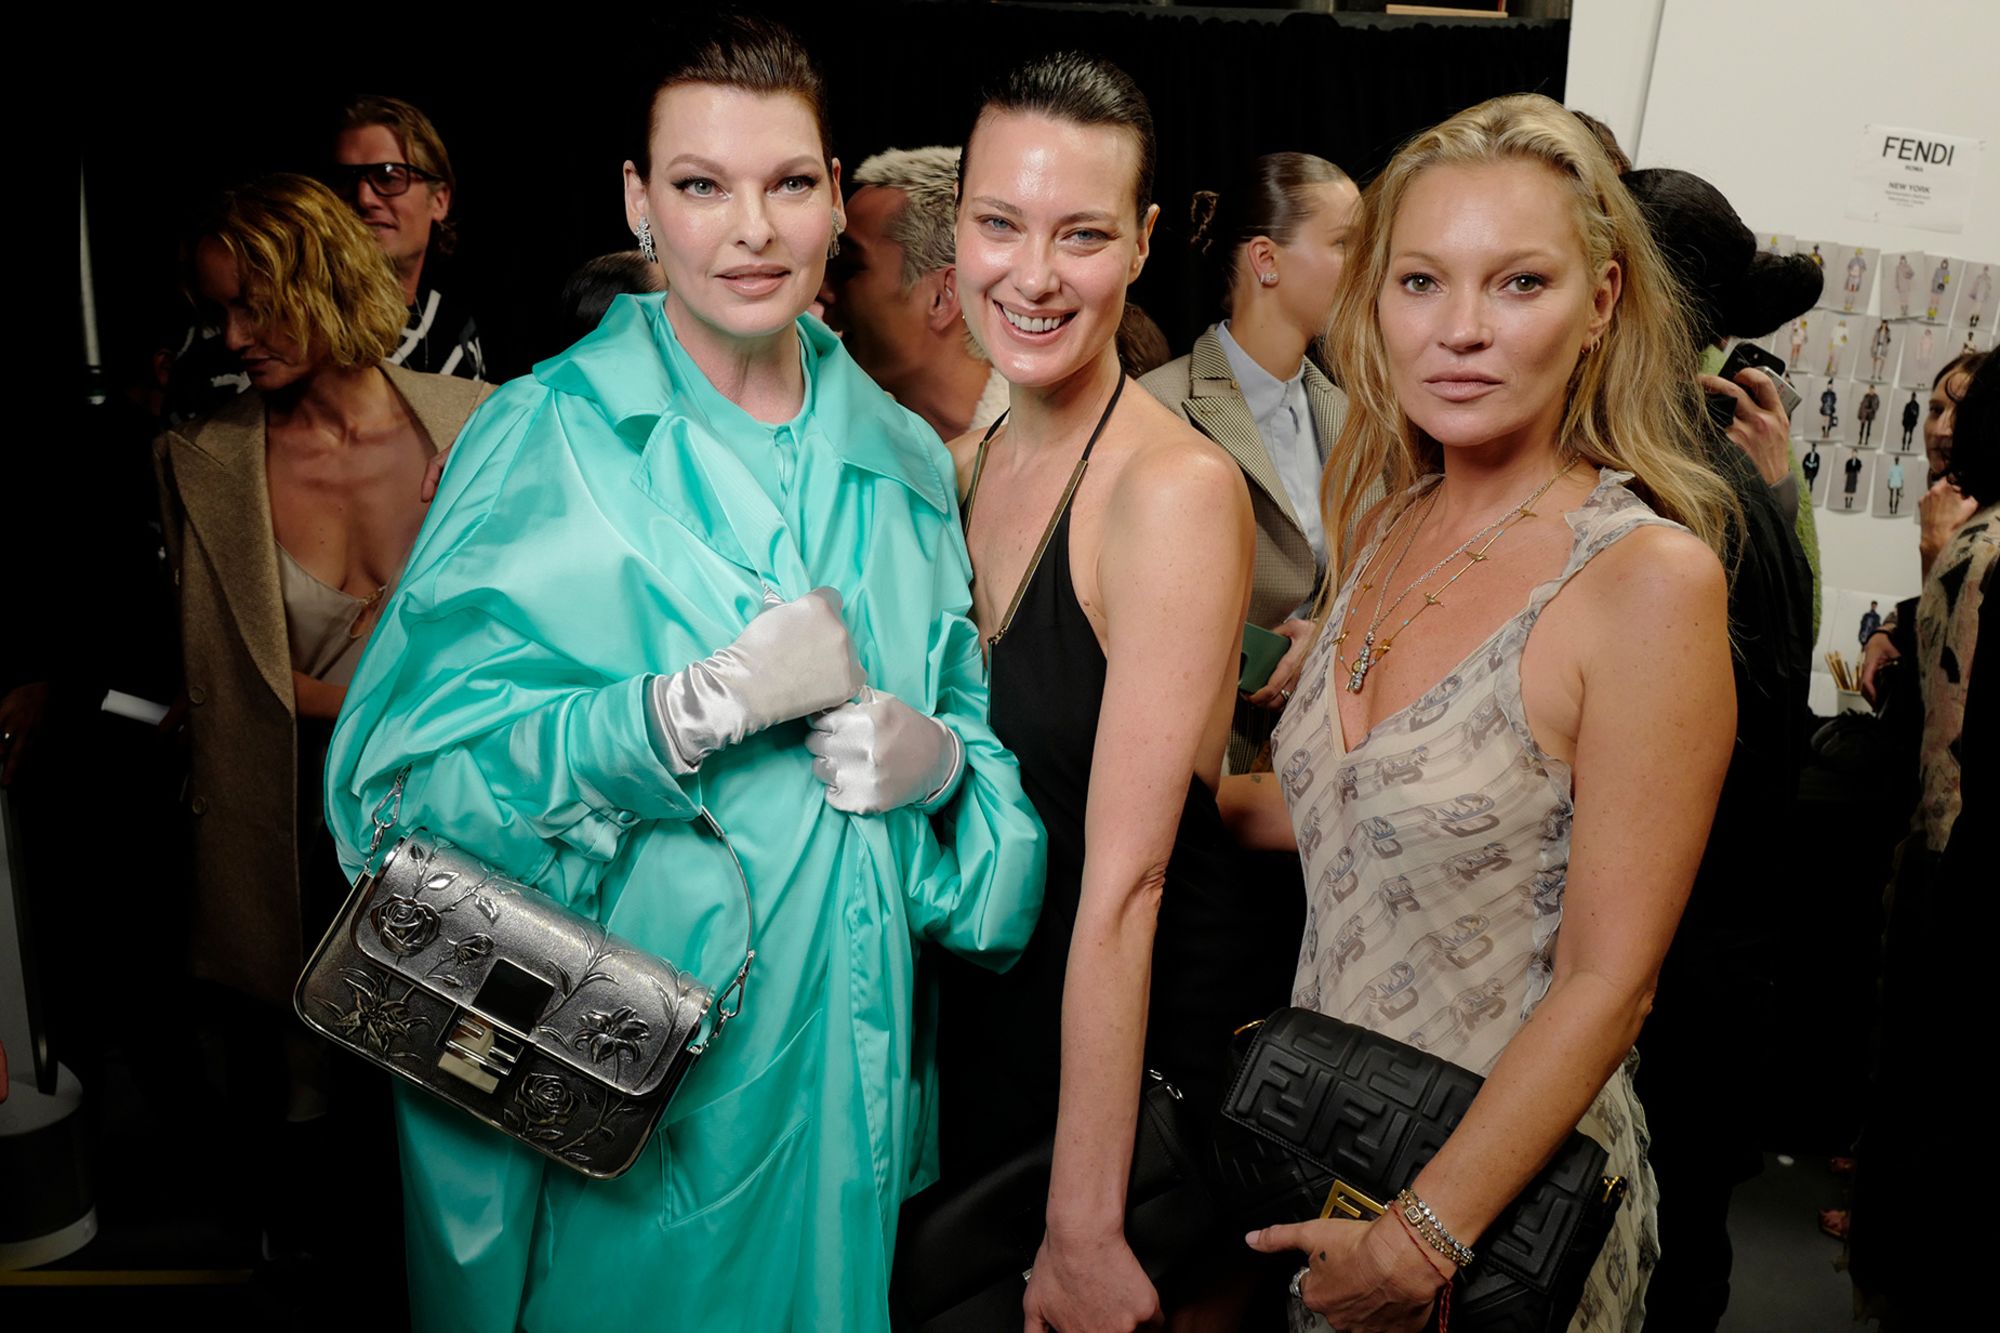 Linda Evangelista, Shalom Harlow, and Kate Moss at the Front Row of the Fendi Spring 2023 fashion show at the Hammerstein Ballroom on September 9th, 2022 in New York City, New York. (Photo by Swan Gallet/WWD via Getty Images)